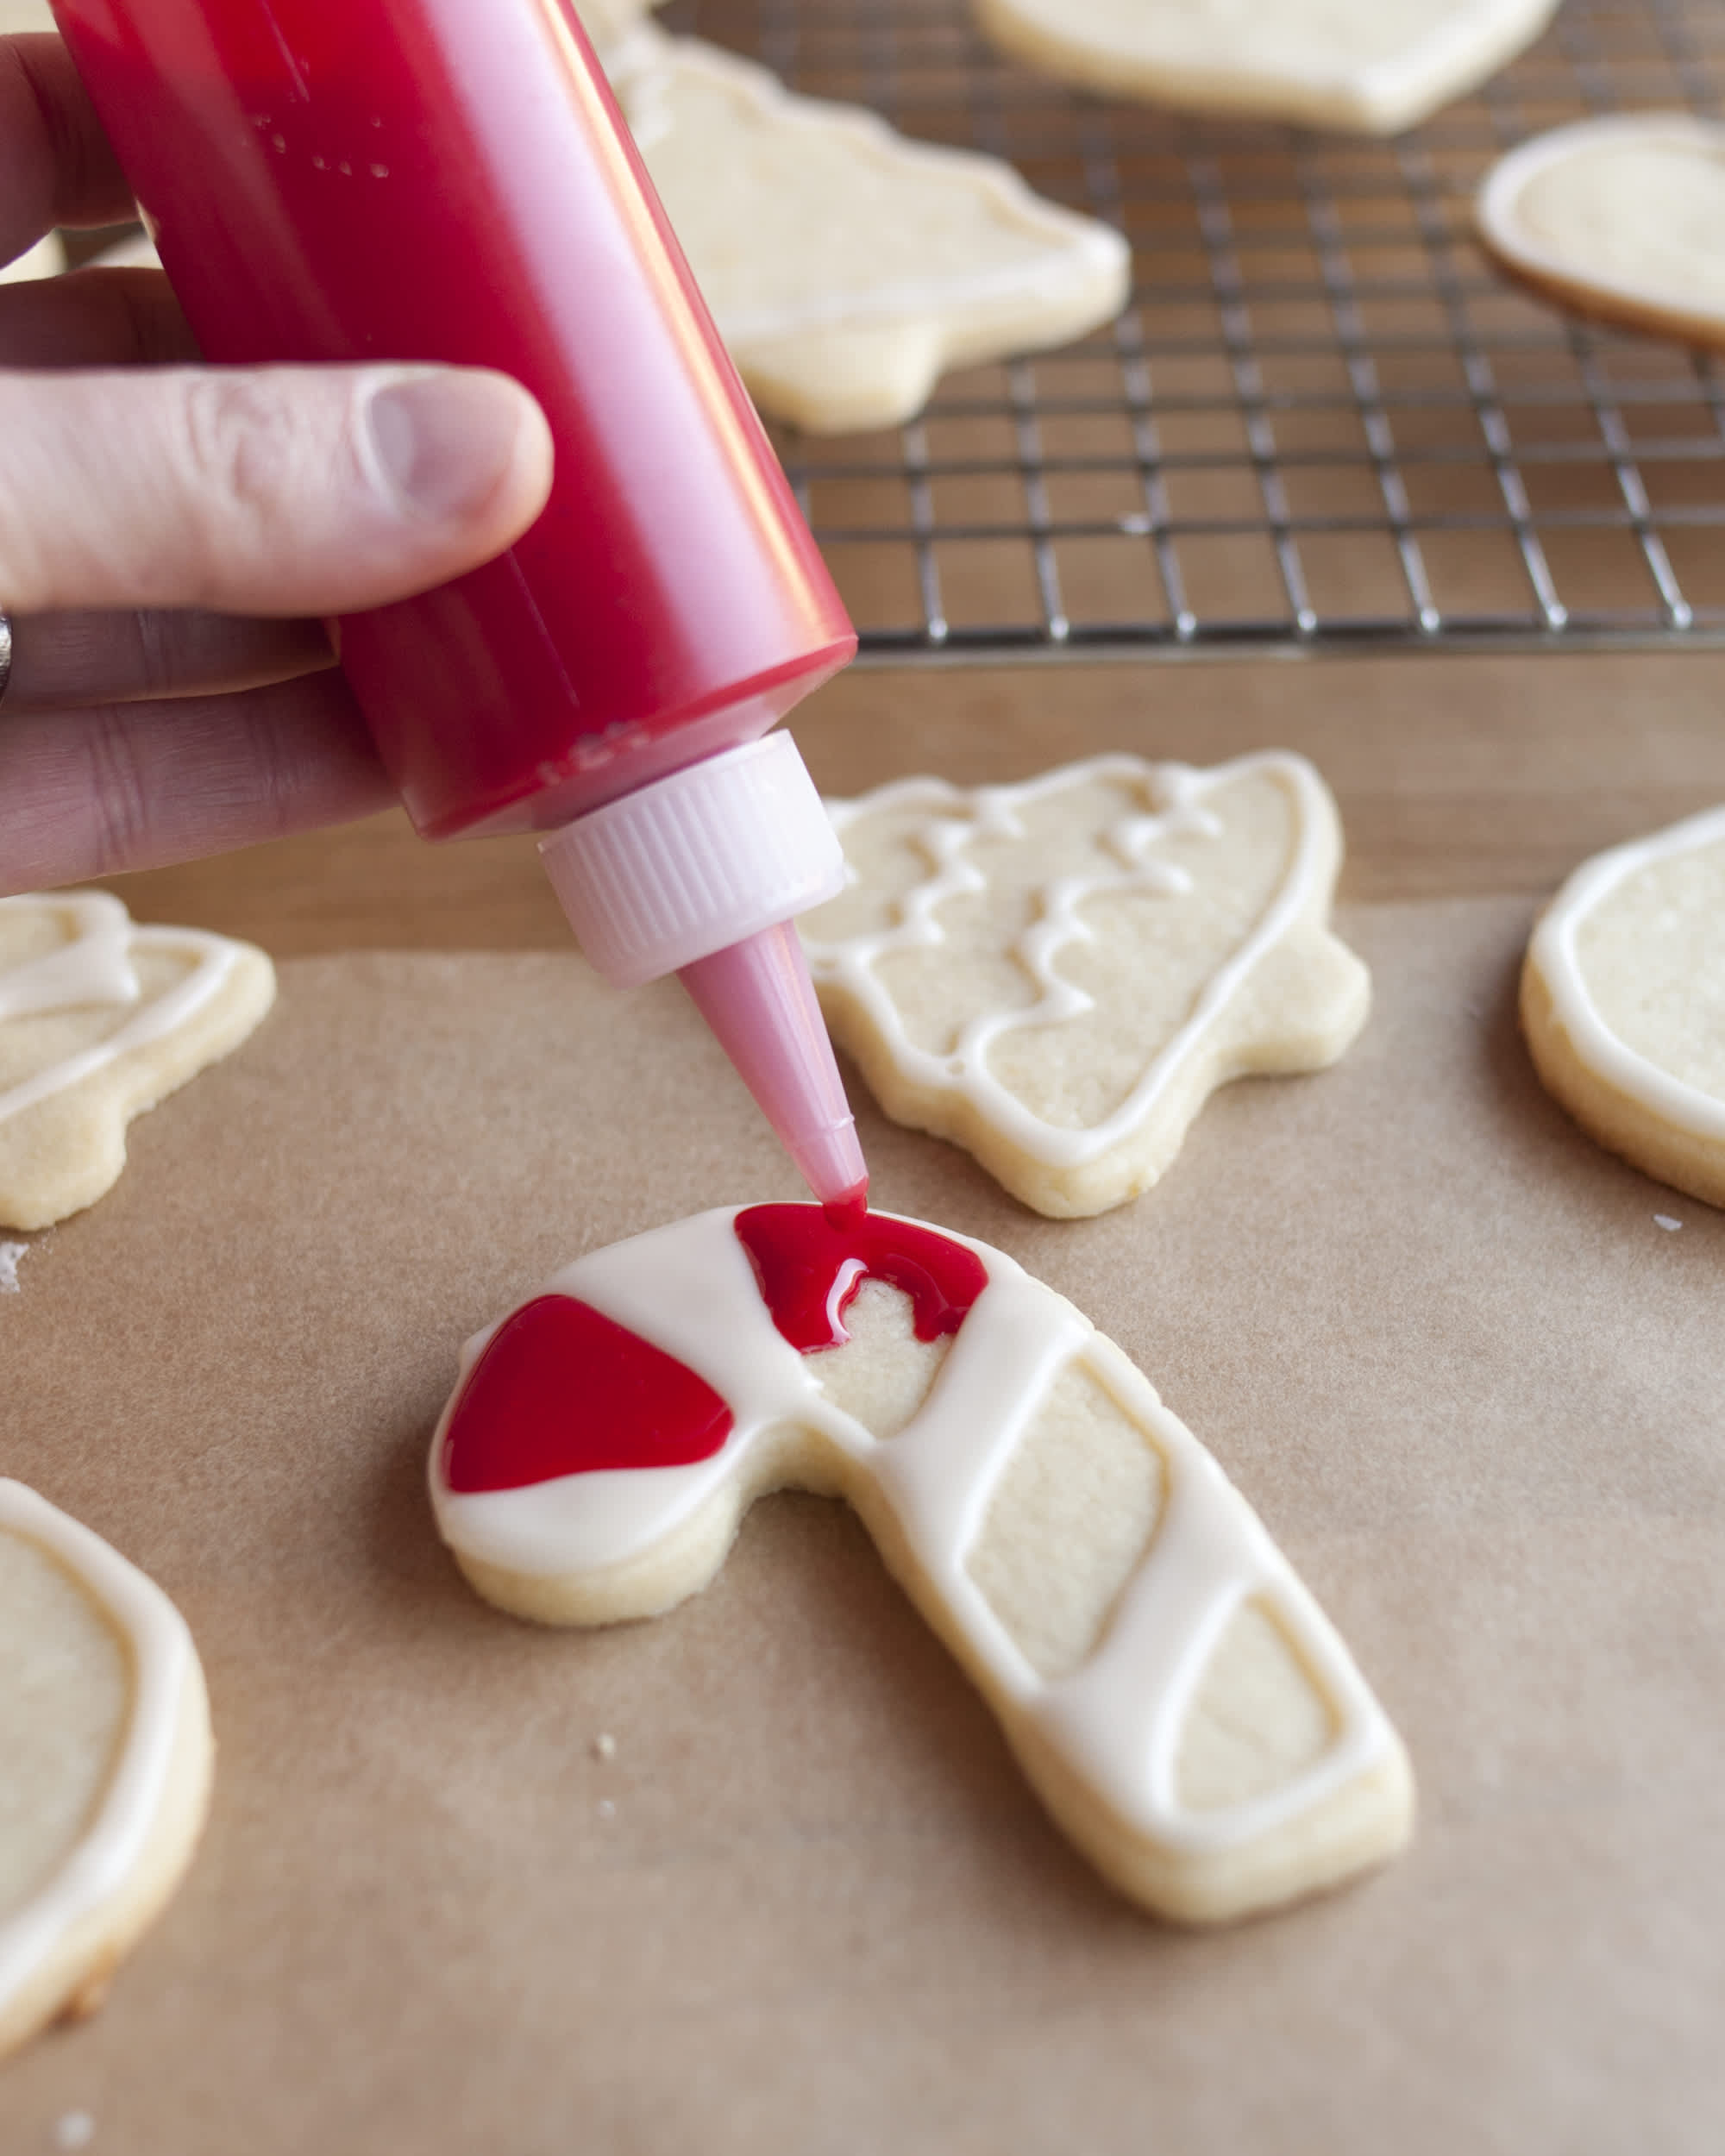 Sugar cookie decorating party supplies. Squeezy bottles of royal icing for  easy use. : r/Baking